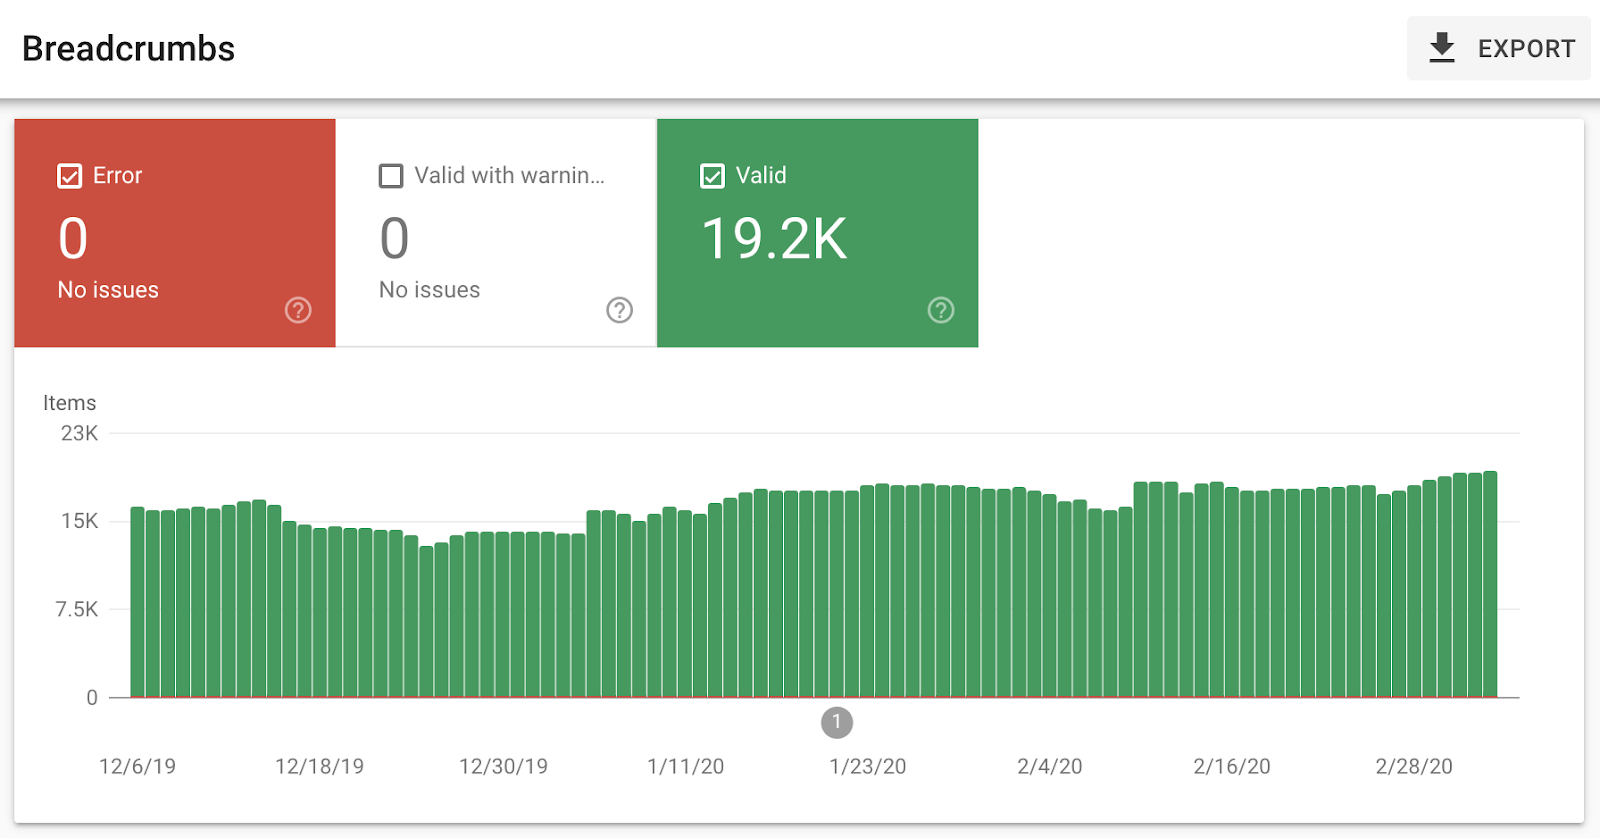 Breadcrumbs report in Search Console showing valid Breadcrumbs